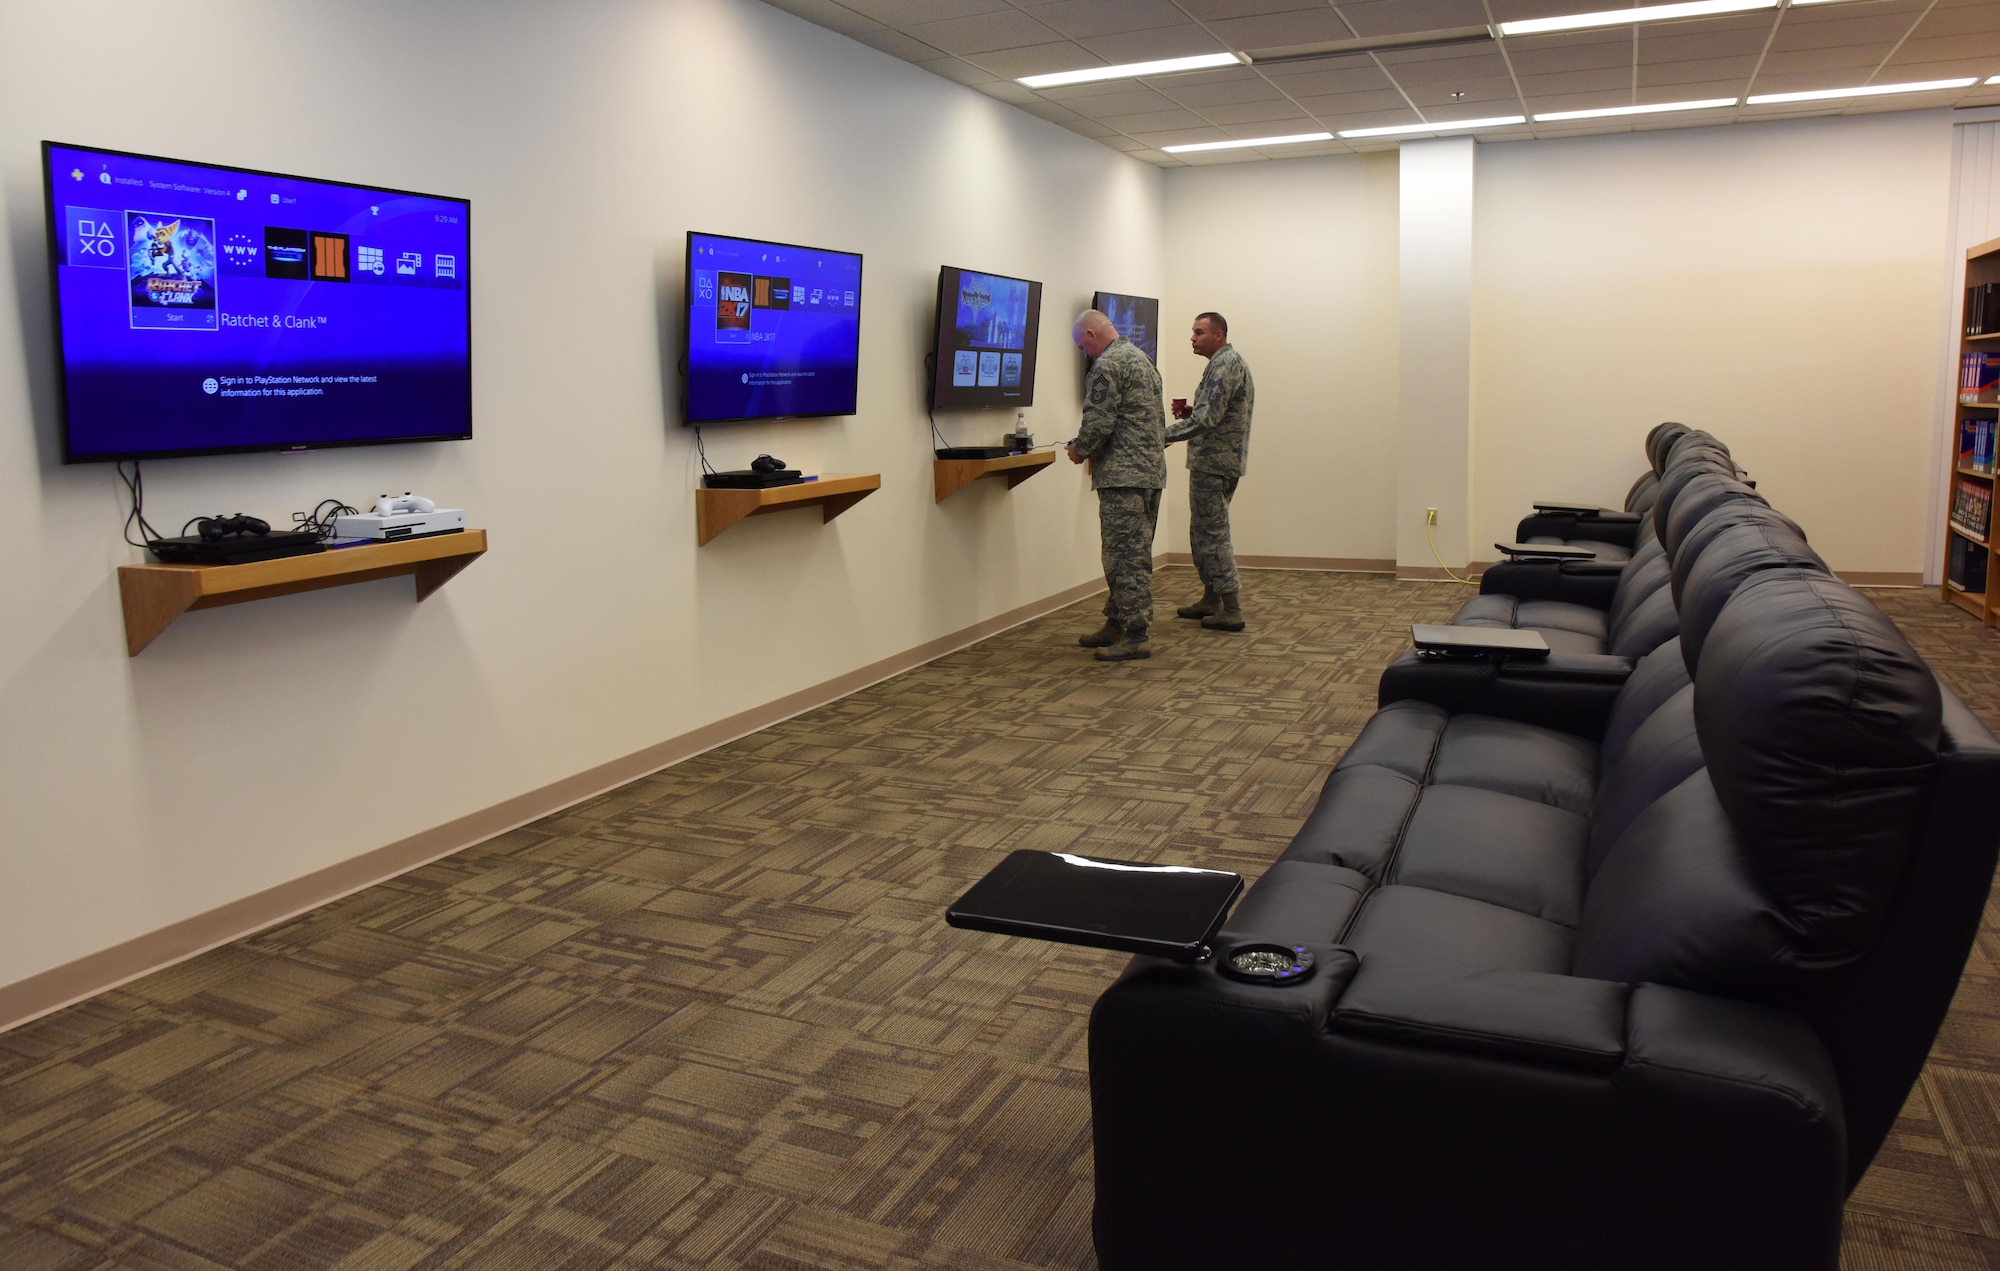 Chief Master Sgts. Derick Stepp, 81st Mission Support Group superintendent, and Leonard Trombley, 81st Training Support Squadron superintendent, check out the gaming station during the McBride Commons Grand Opening ceremony May 16, 2017, on Keesler Air Force Base, Miss. The nine-month project transformed the former base library into a common area with a children’s library, computer stations, engraving, framing, marketing and print shops and a full kitchen for those with base access. (U.S. Air Force photo by Kemberly Groue)